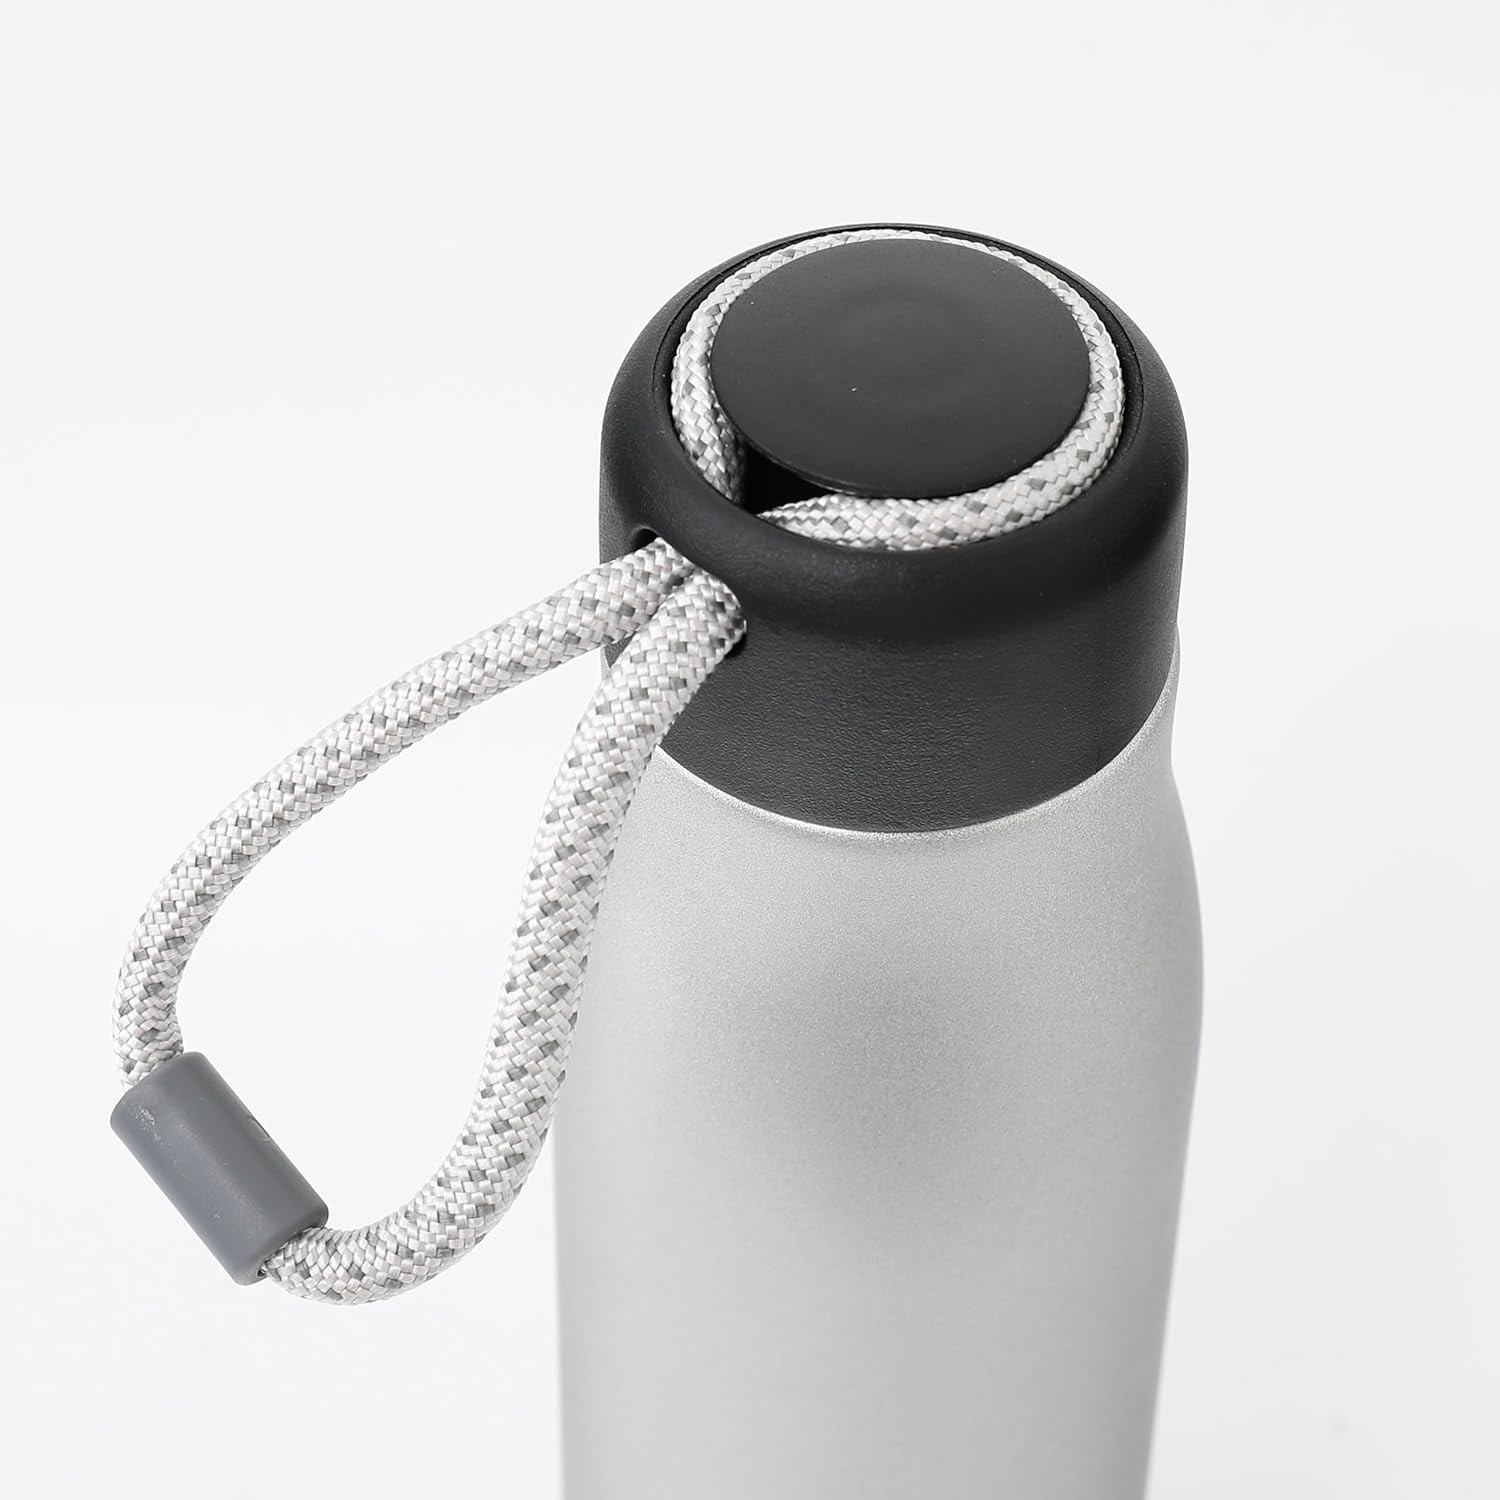 Kuber Industries Water Bottle | Vacuum Insulated Travel Bottle | Hot & Cold Water Bottle | Water Bottle with Carry Handle | Thermos Flask for Gym Bottle | MYZ-230805B | 550 ML | Silver